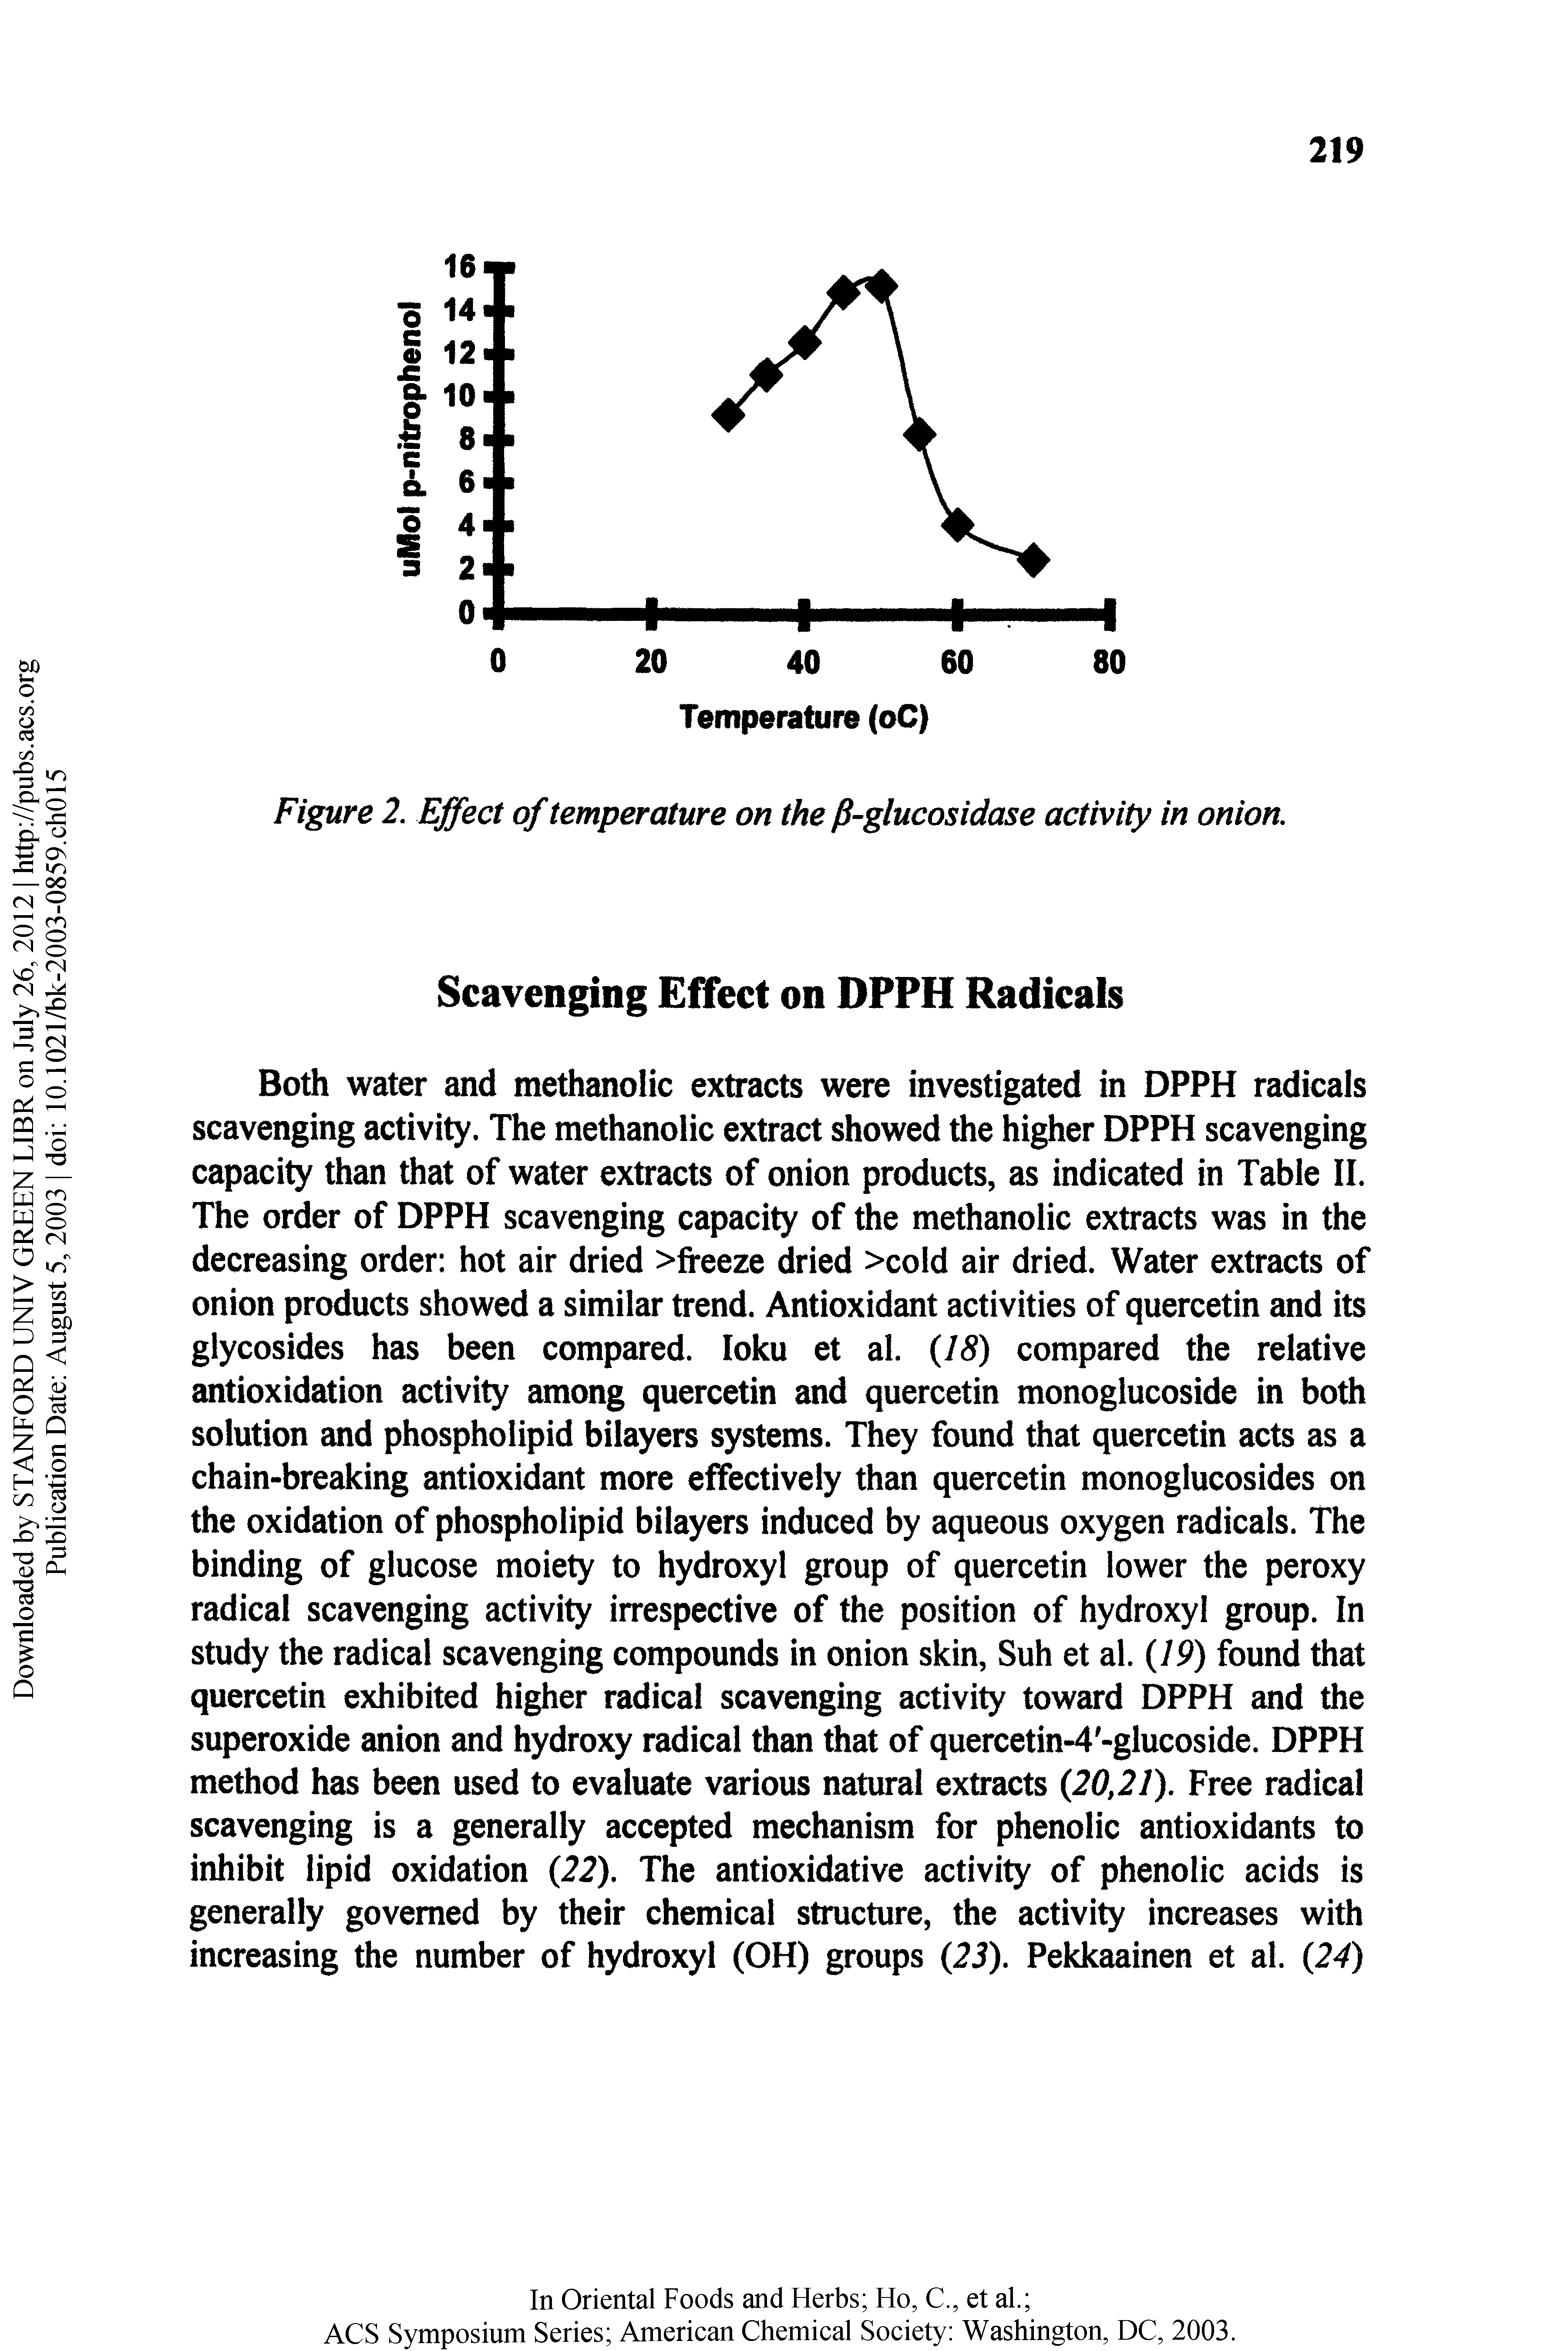 Figure 2. Effect of temperature on the fi-glucosidase activity in onion.